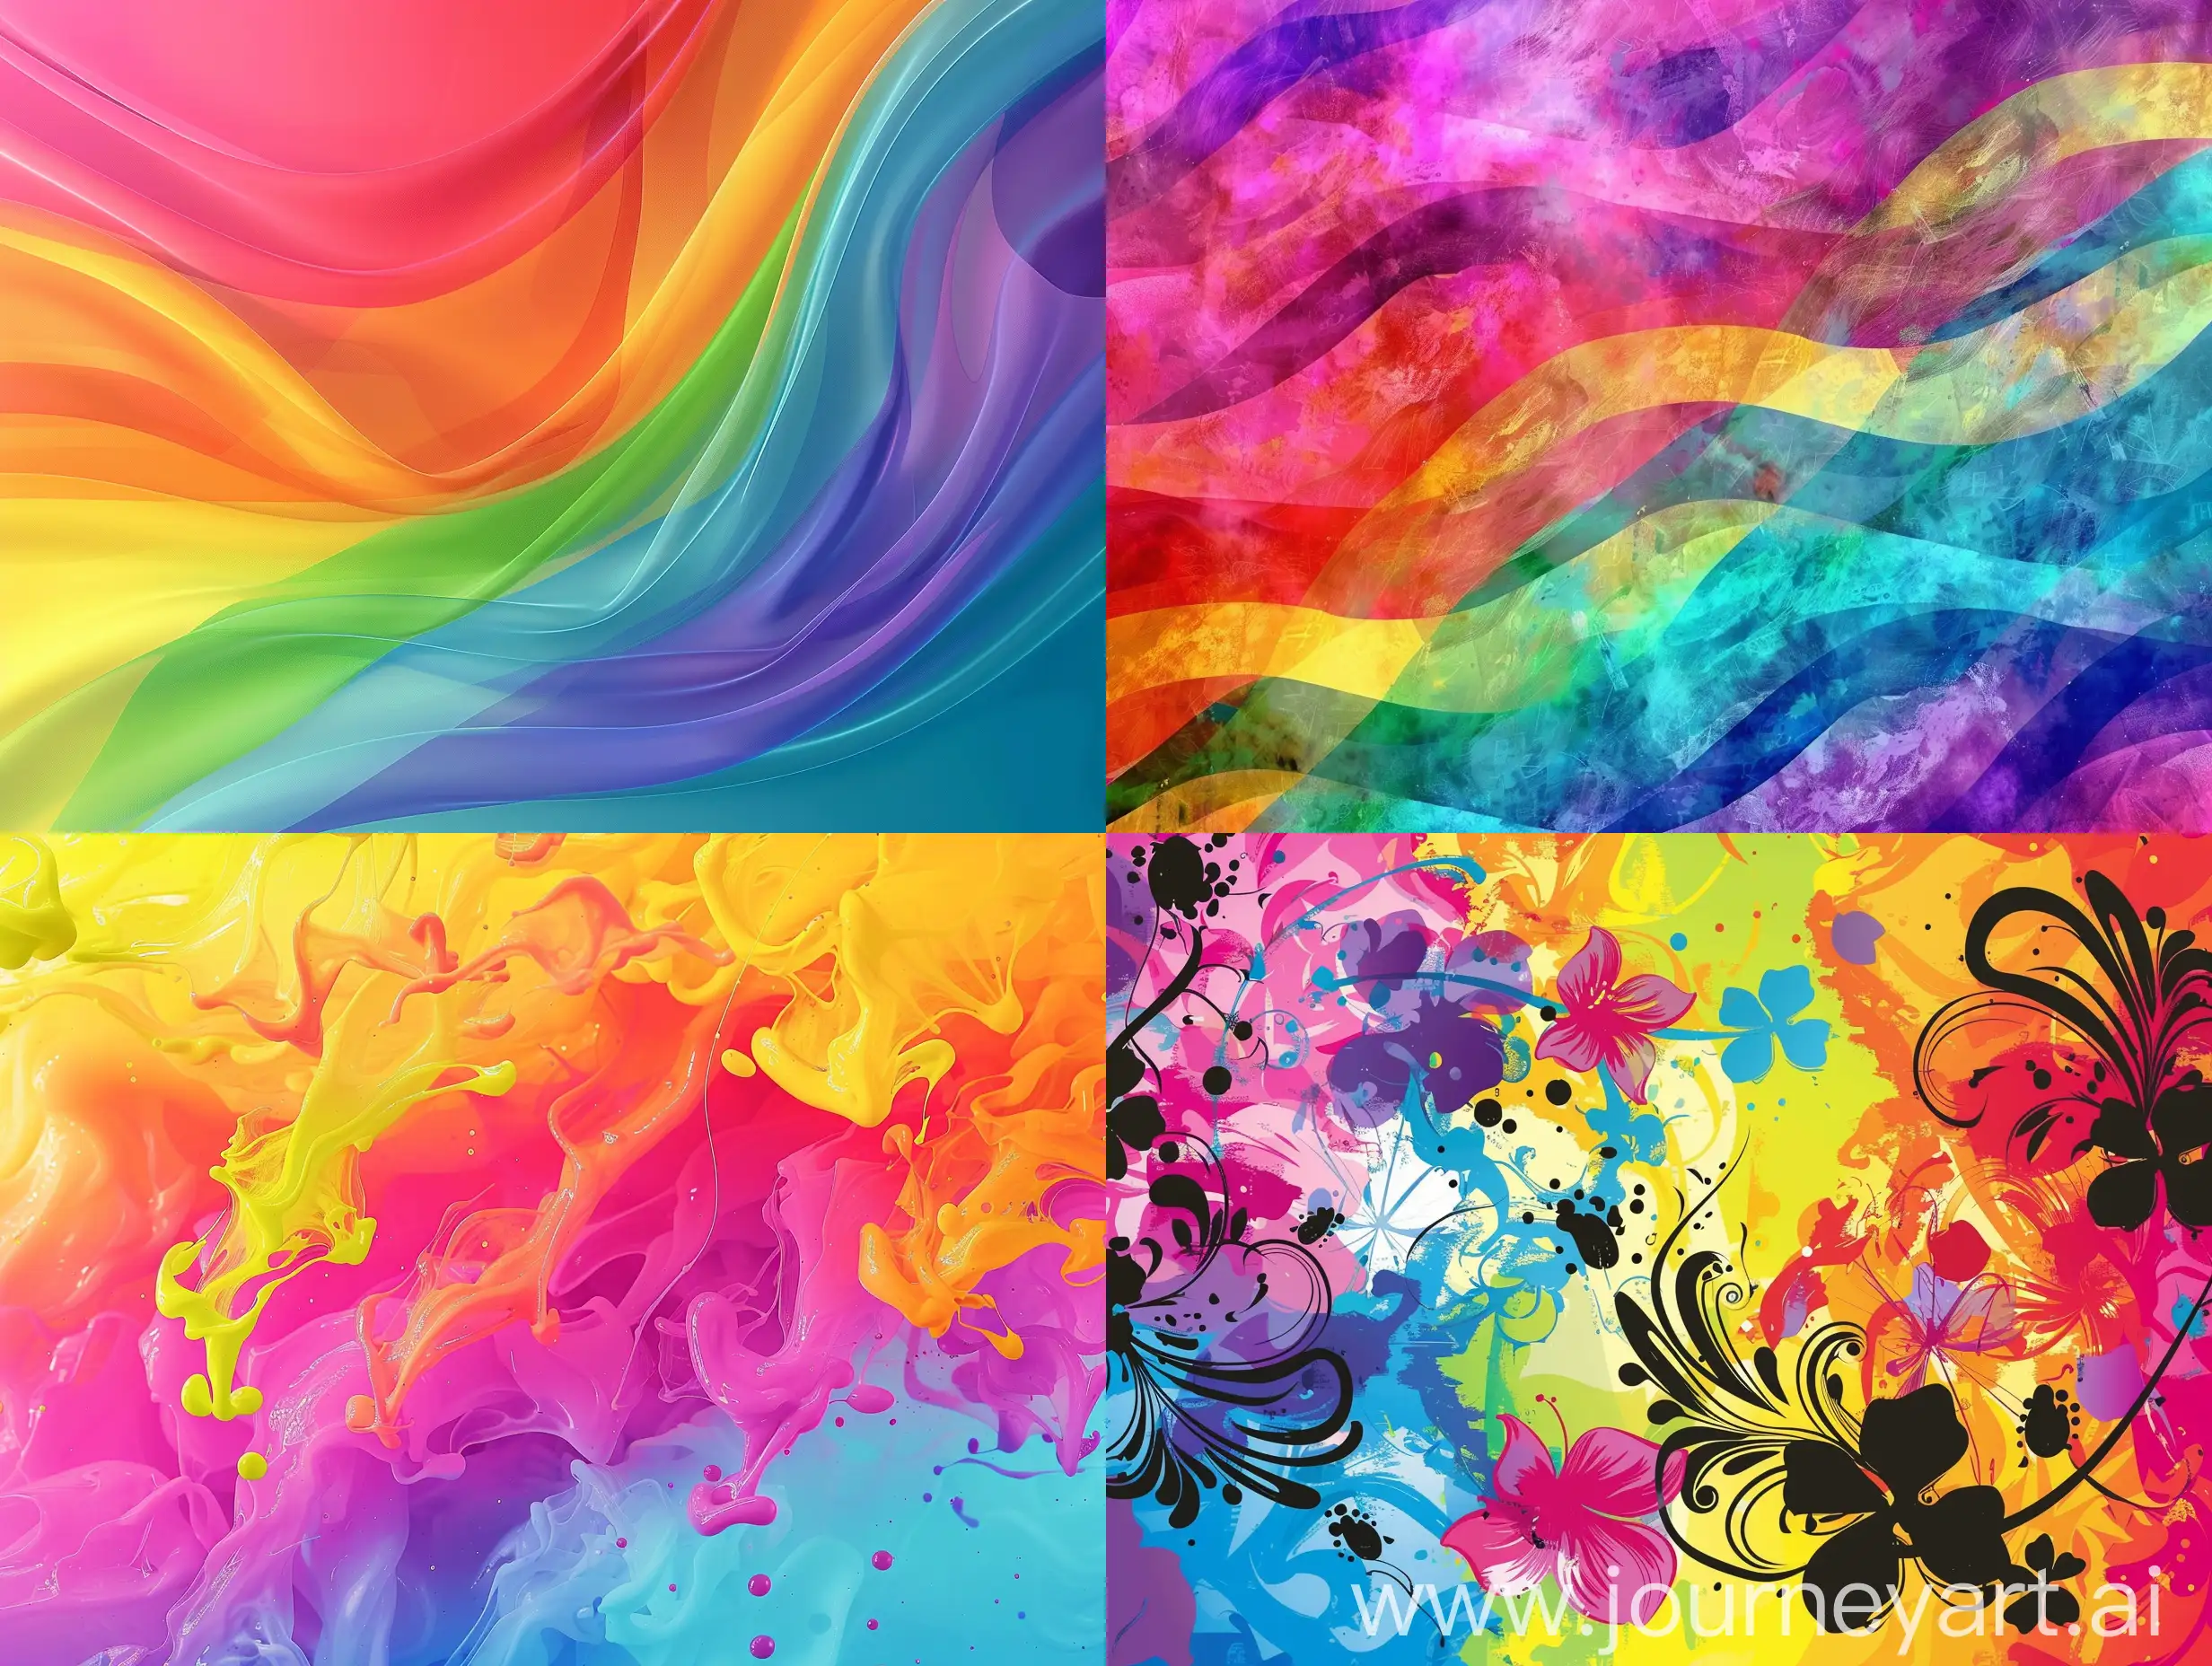 I need a colorful background with color code 003a0c to create a banner. Please create this image for me.